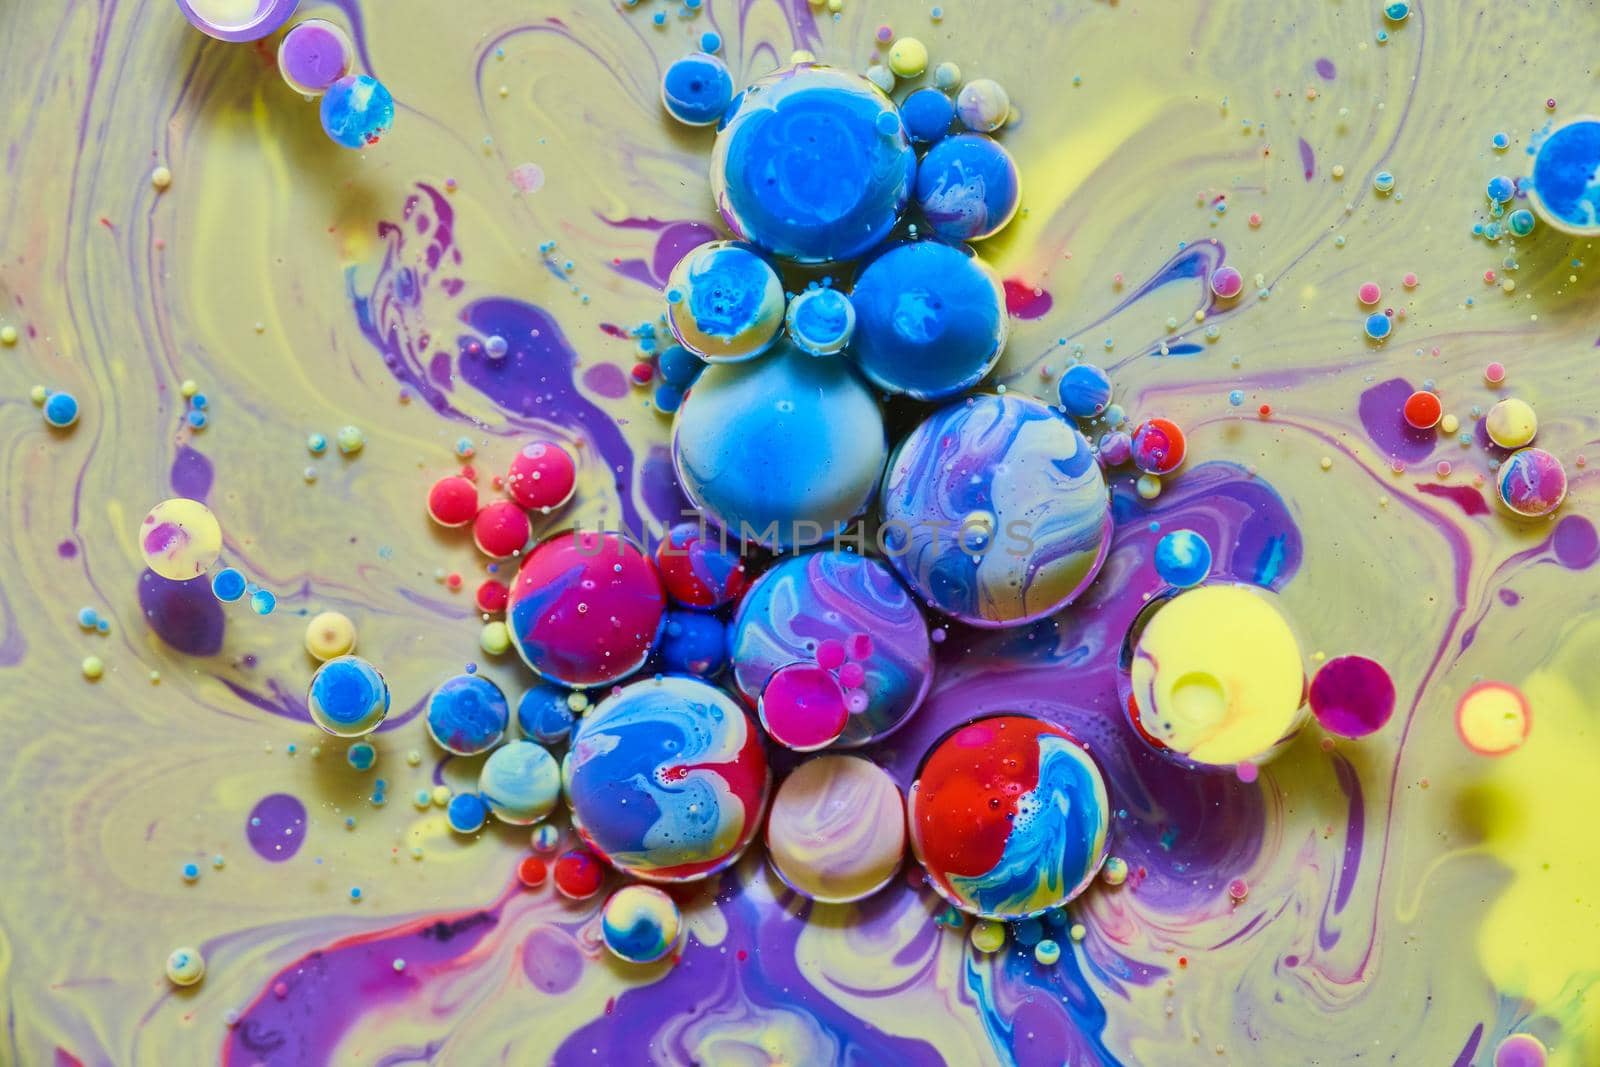 Image of Yellow and purple silky surface with colorful rainbow orbs